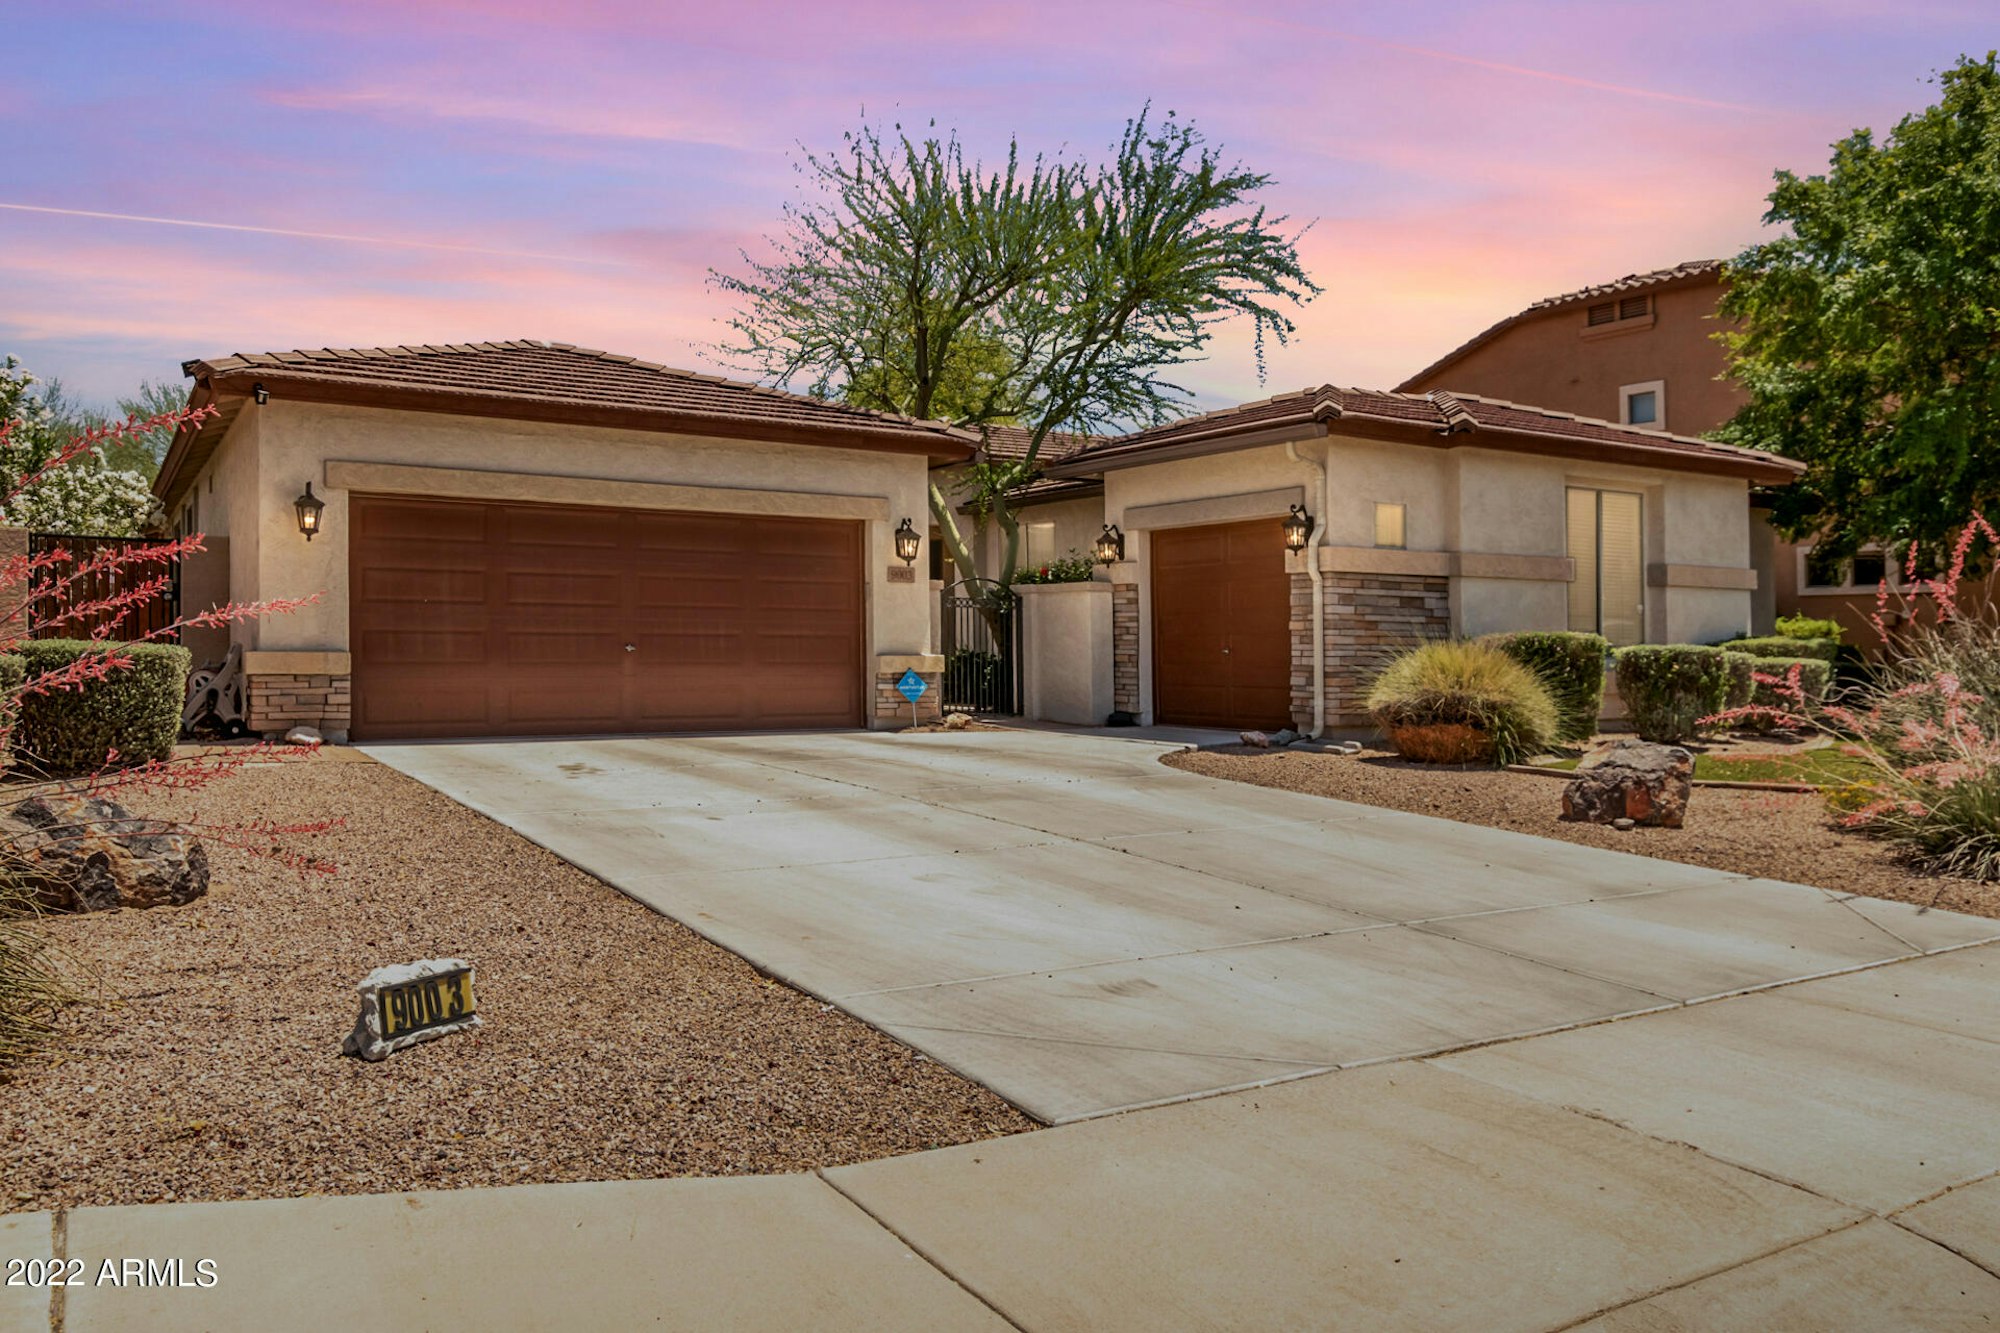 Photo 1 of 30 - 9003 S 53rd Dr, Laveen, AZ 85339